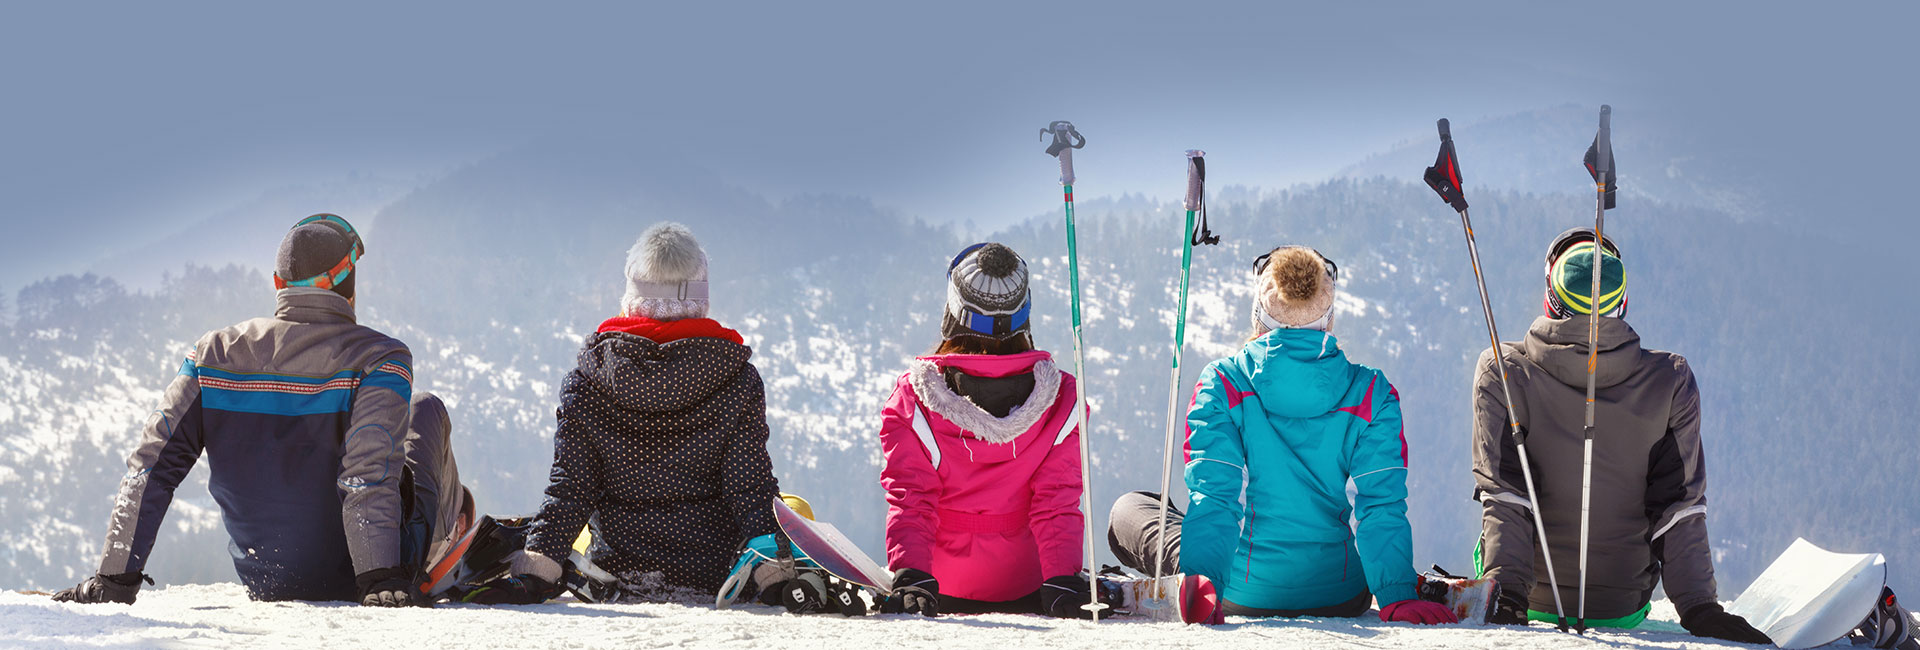 Five travel nurses wearing ski attire and holding skis overlooking the snowy slopes.